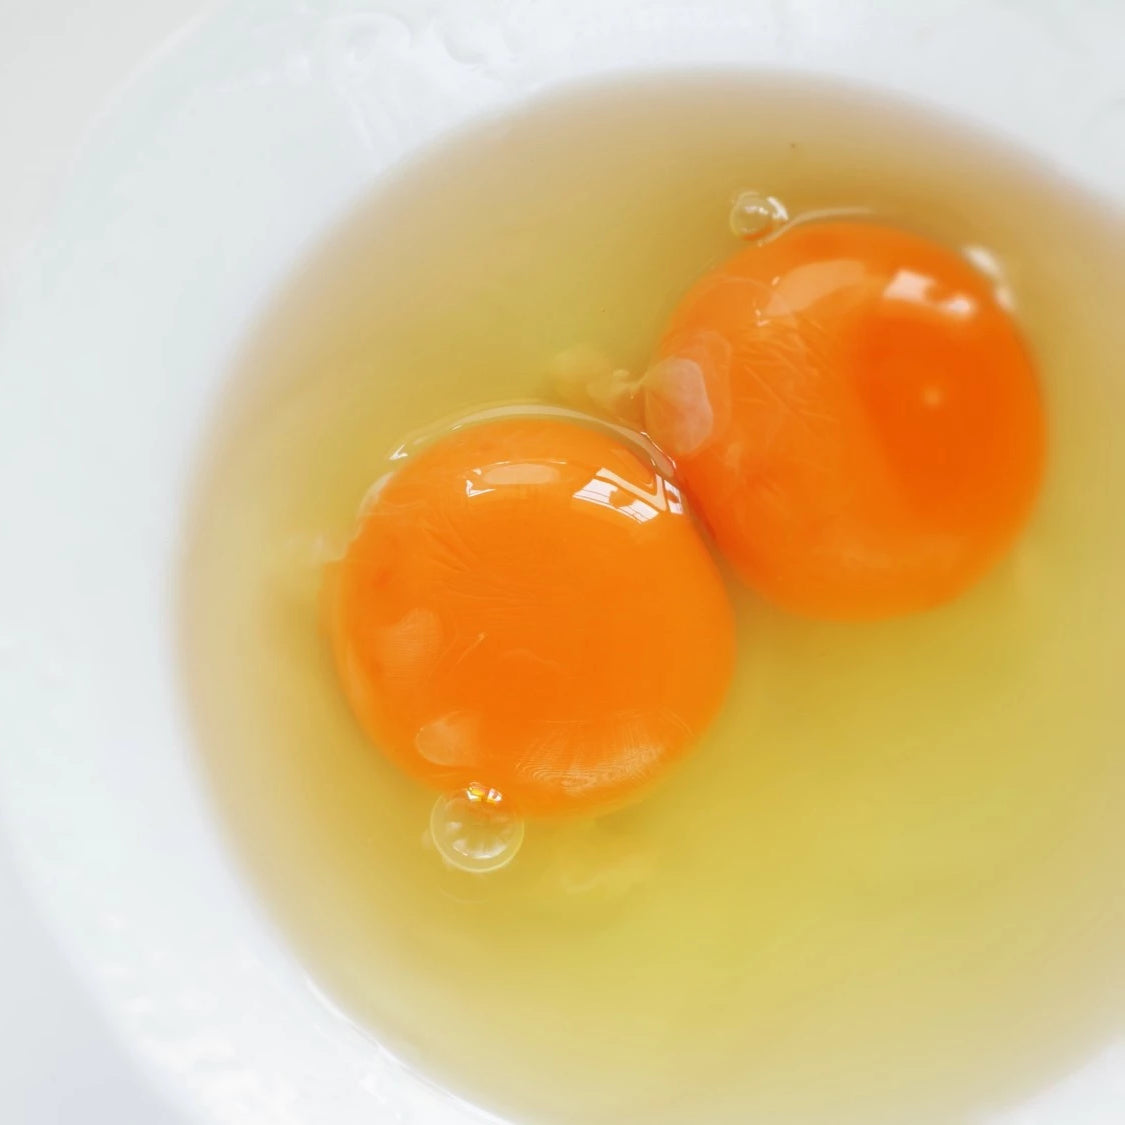 Double yolks occur when two eggs join together at the point they separate from the ovaries, or if a yolk essentially loses its way during formation